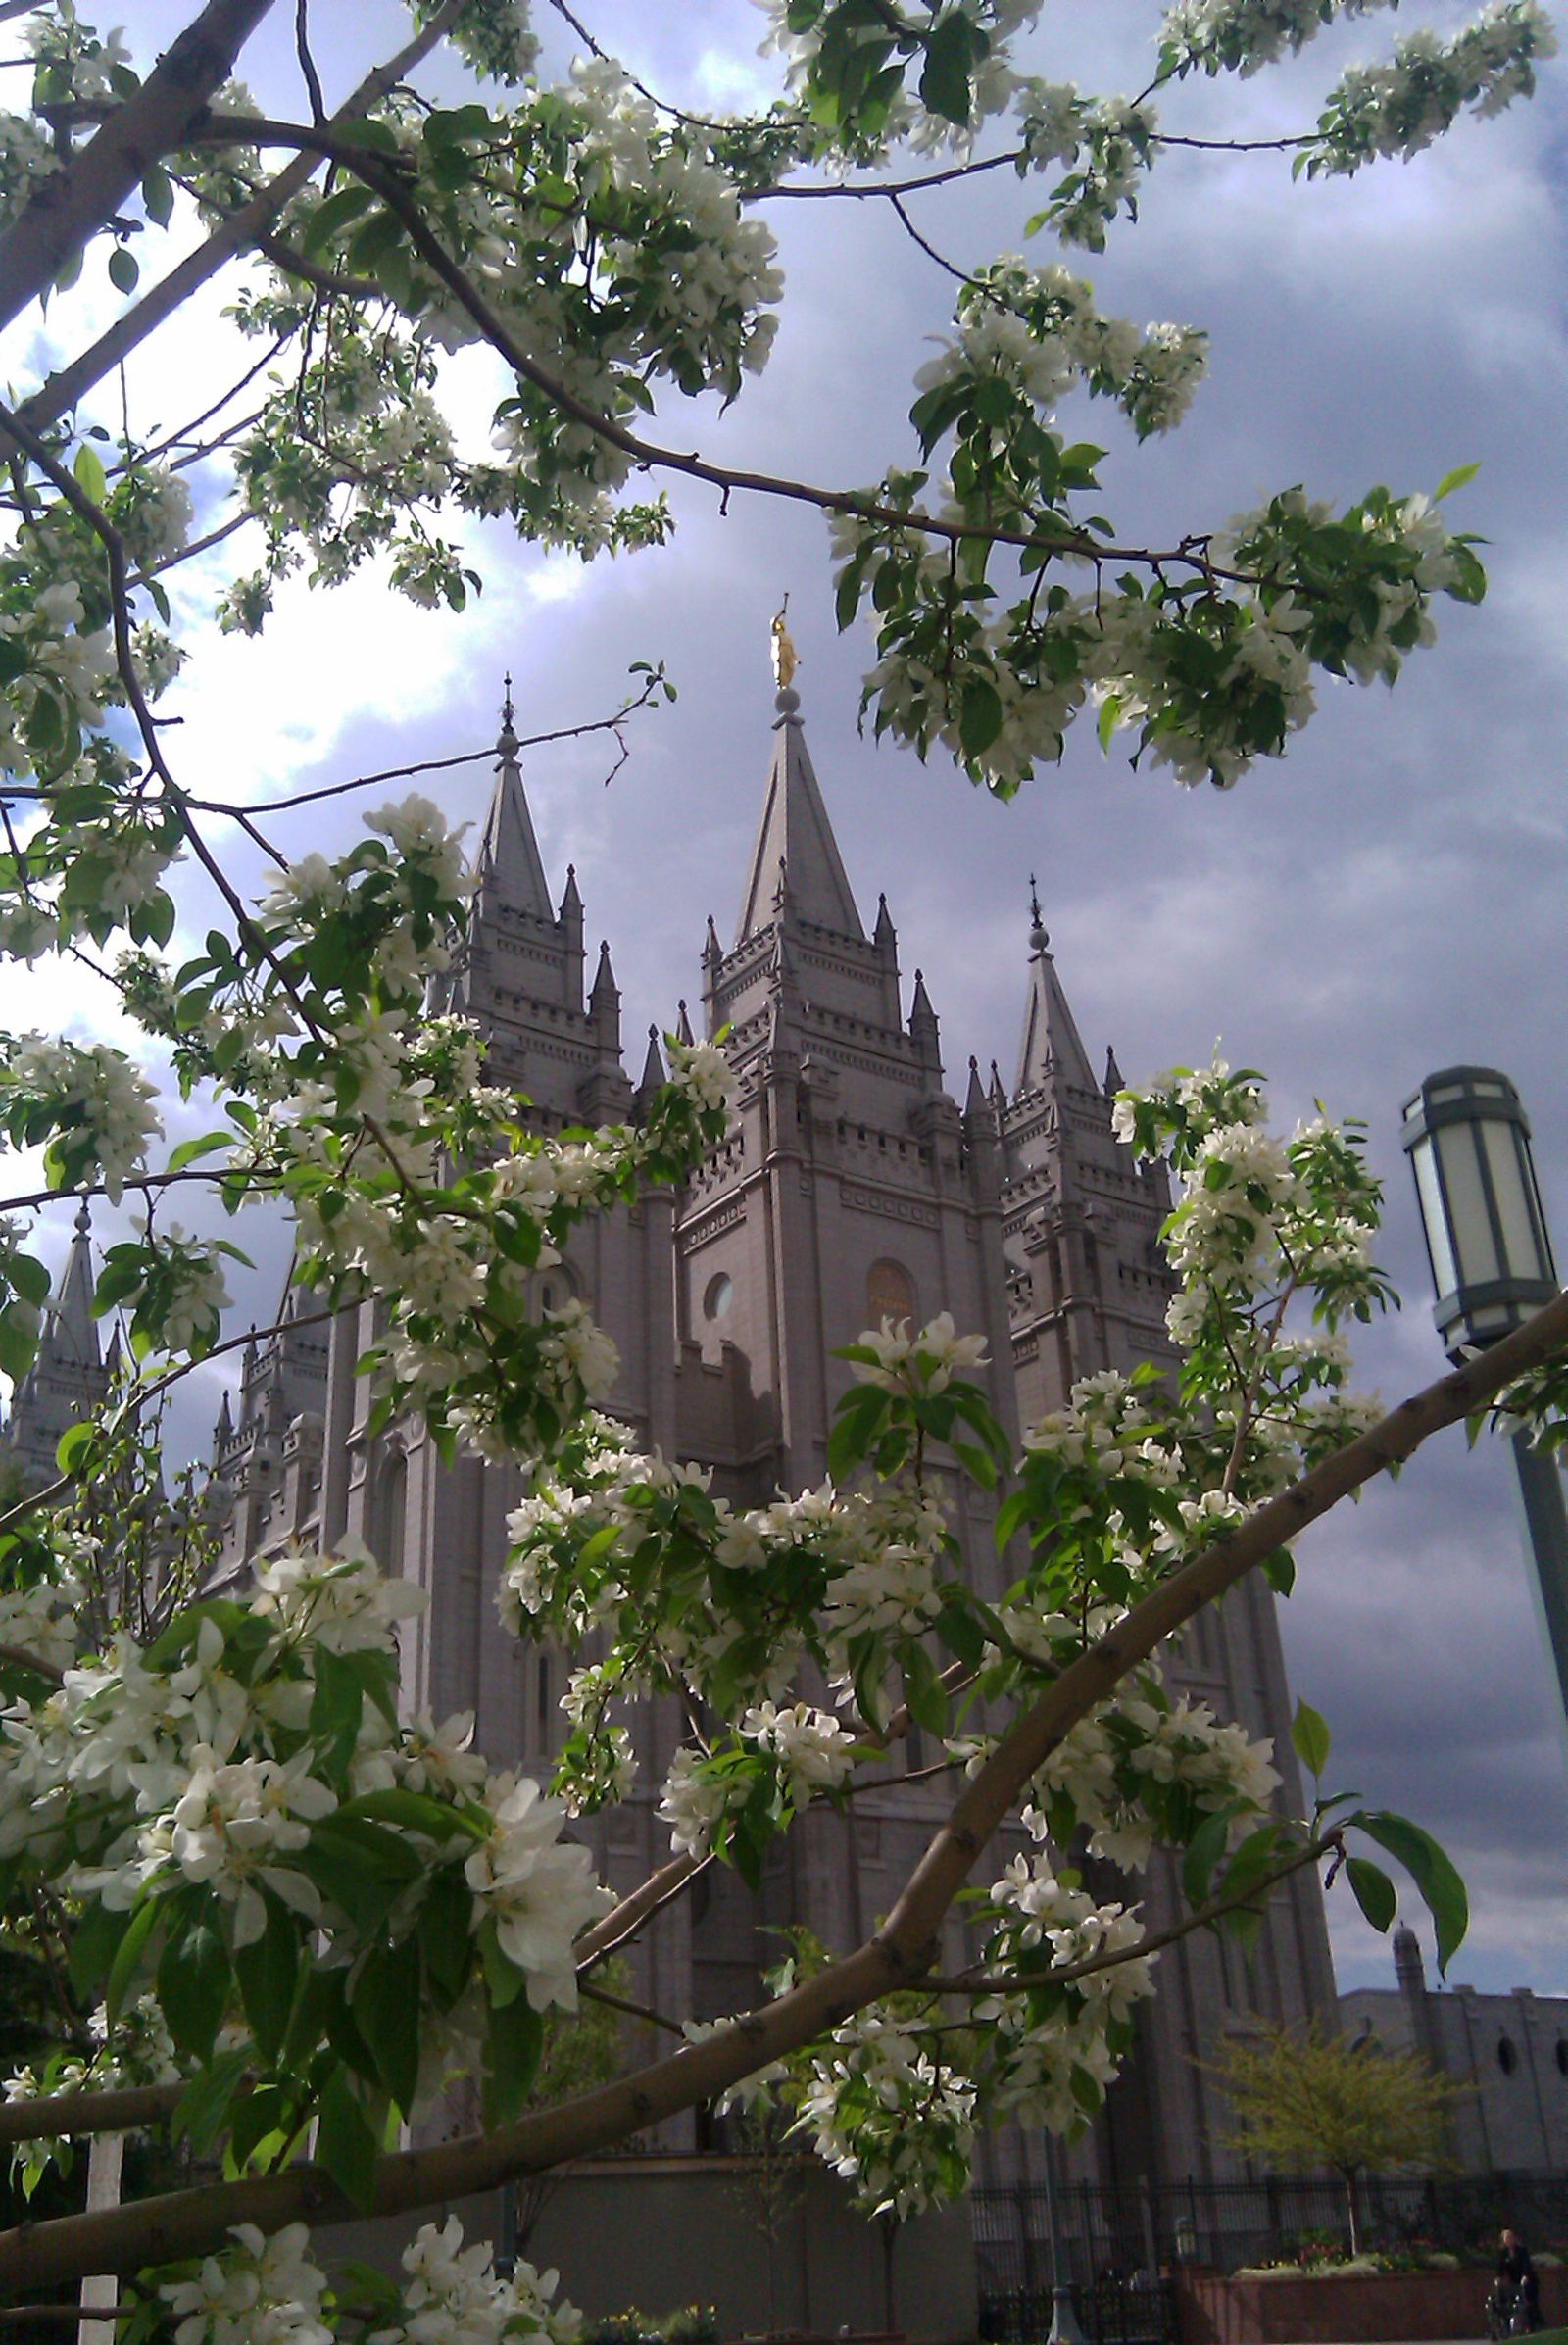 The Salt Lake Temple, including scenery.